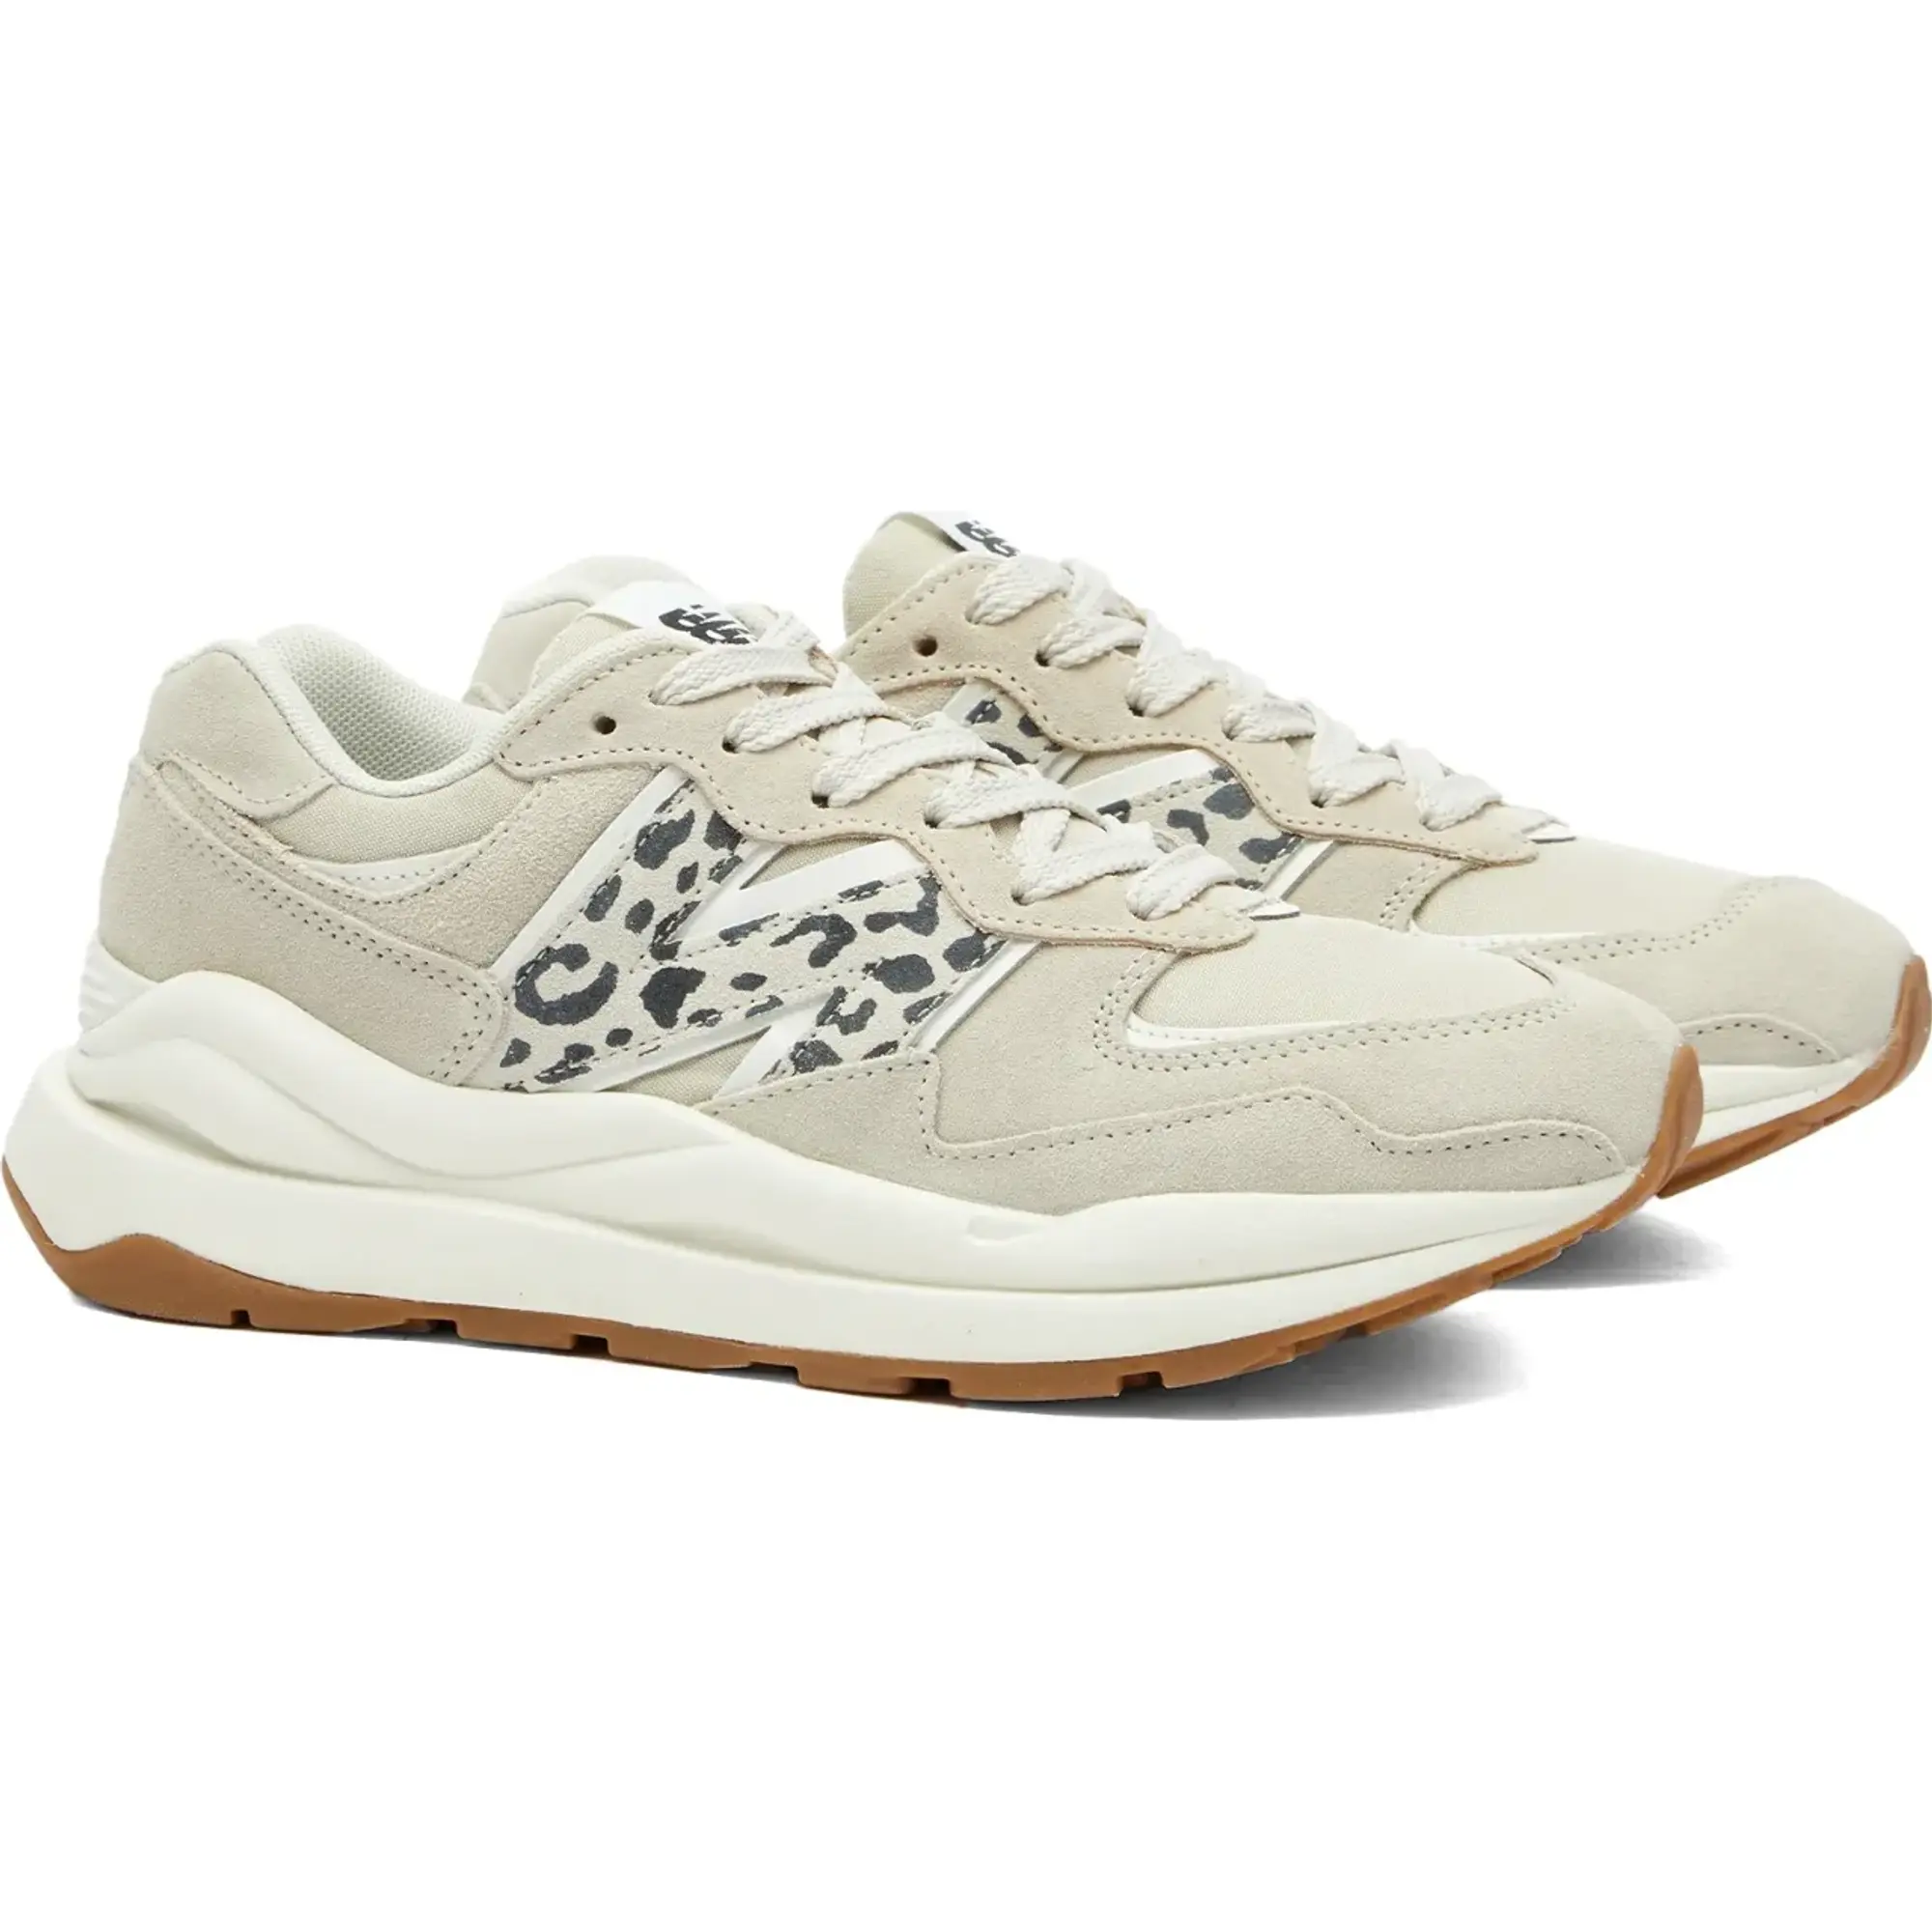 New Balance 5740 Trainers In Oatmeal Leopard Print-Neutral